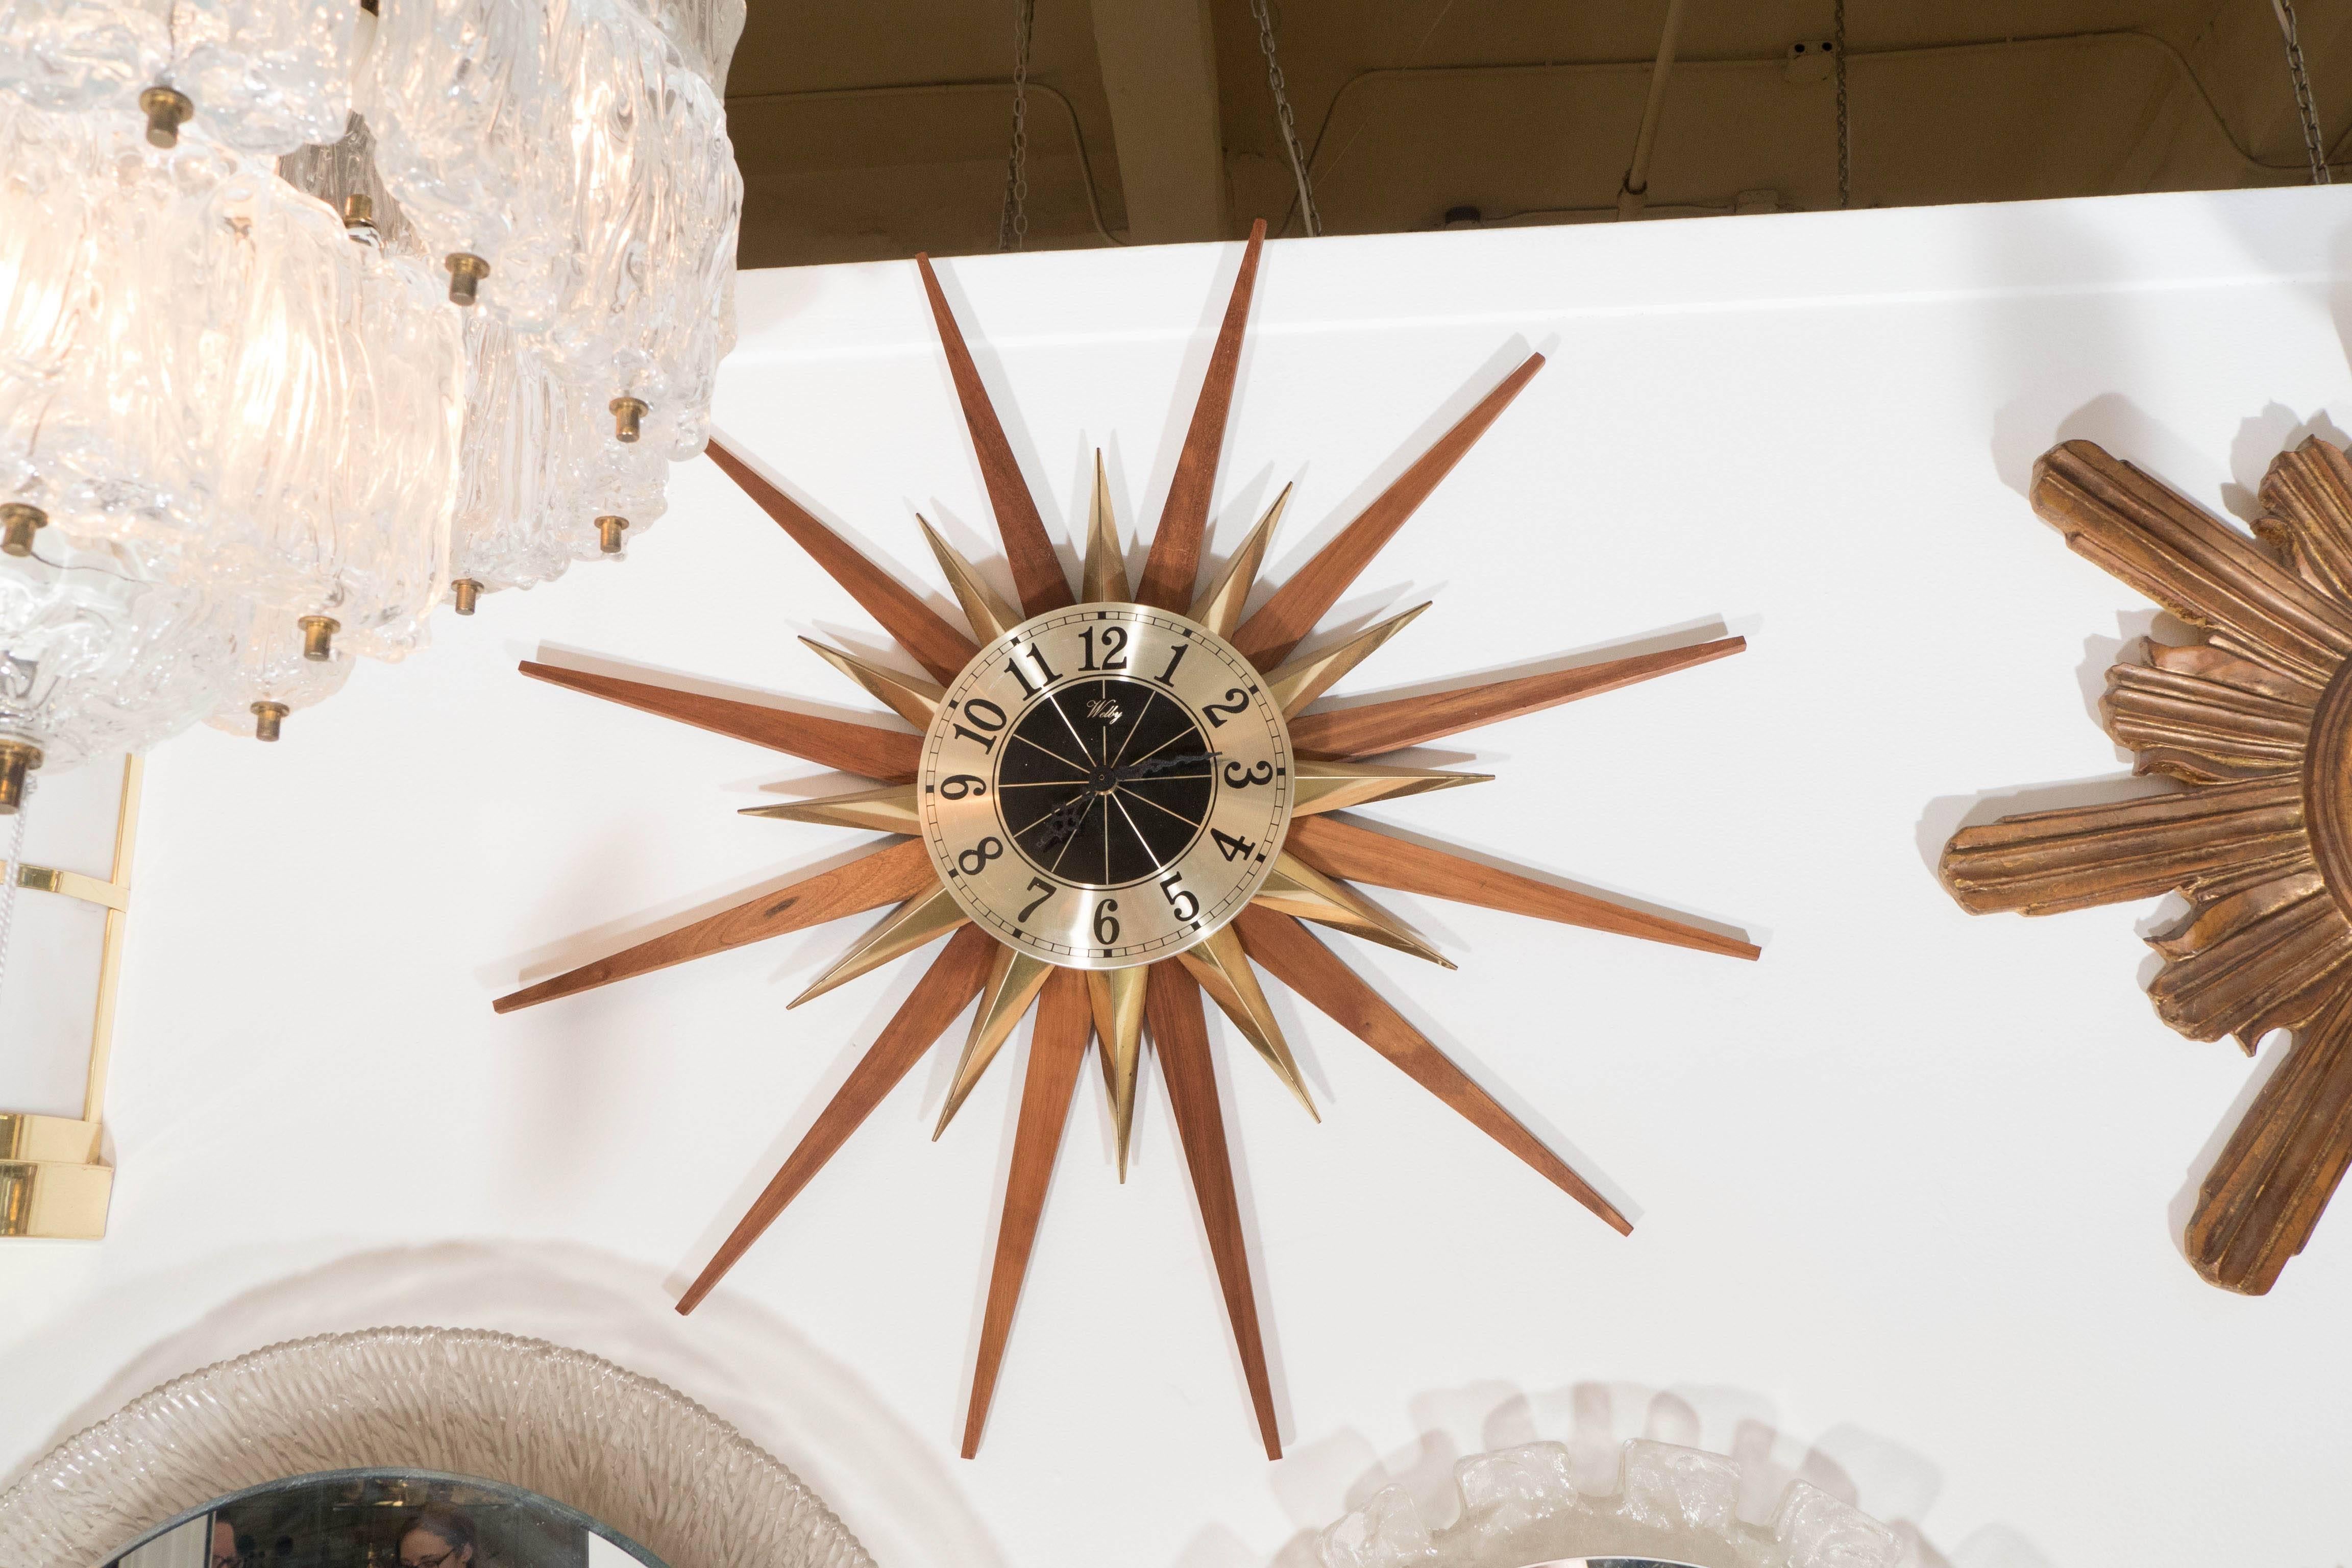 A starburst wall clock, produced by Elgin for Welby of Germany, circa 1960s-1970s, with polished brass face, surrounded by decorative rays in brass and warm toned wood. This piece is in very good vintage condition, consistent with age.